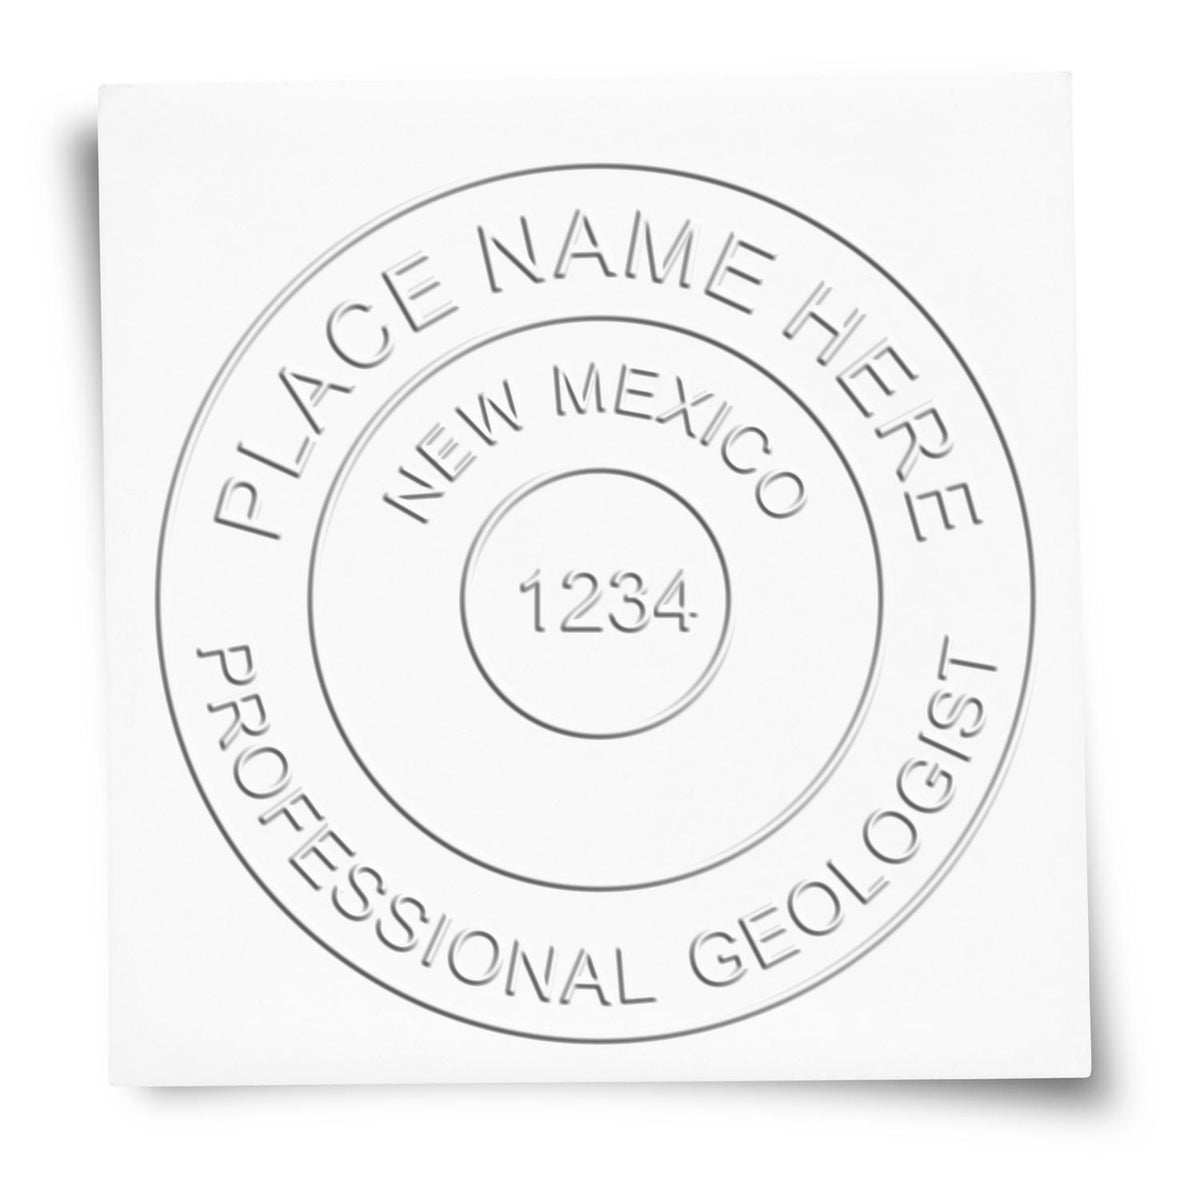 A stamped imprint of the Heavy Duty Cast Iron New Mexico Geologist Seal Embosser in this stylish lifestyle photo, setting the tone for a unique and personalized product.